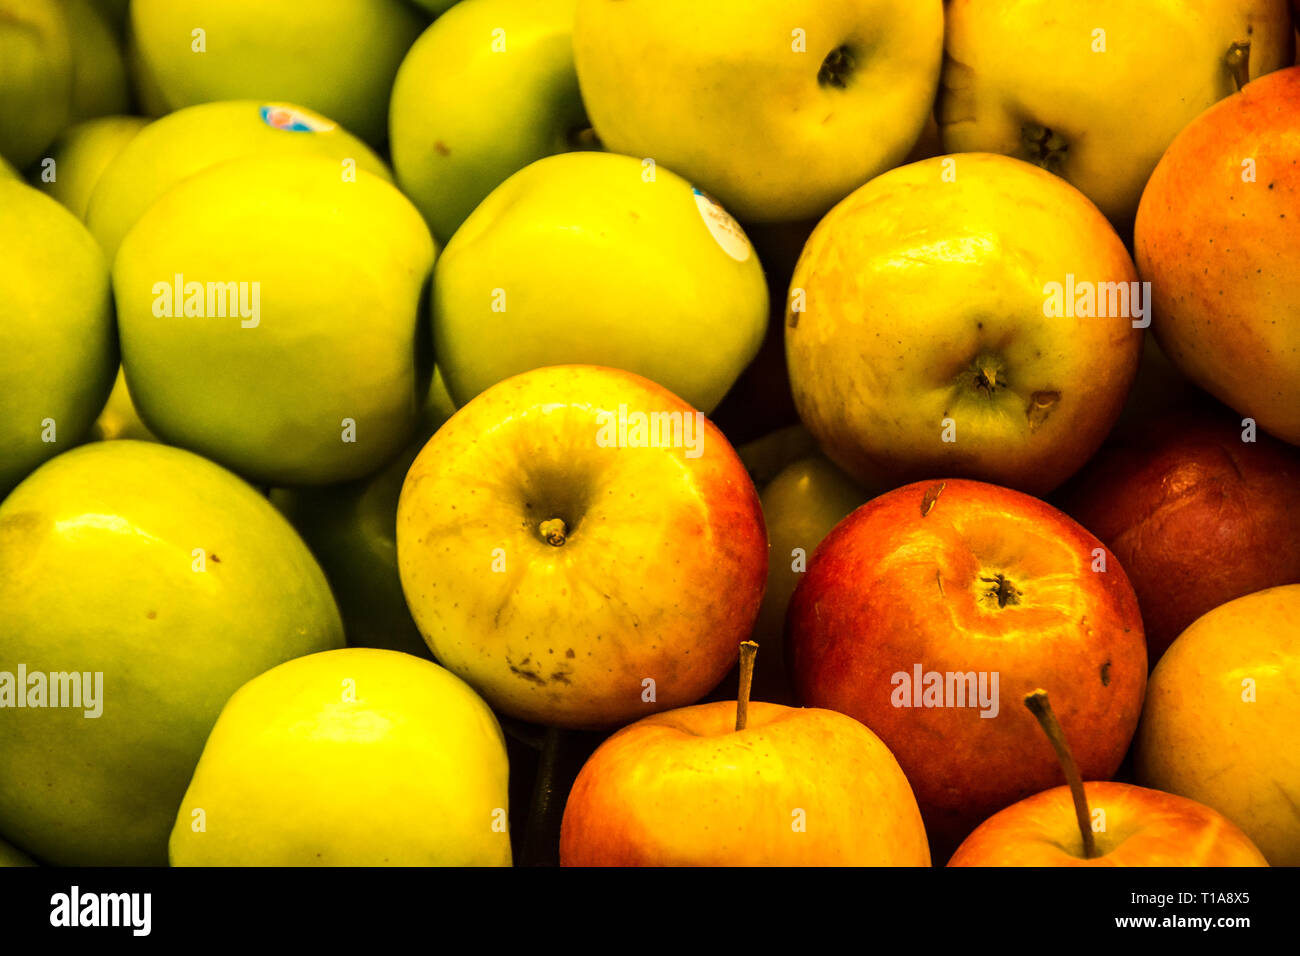 Bagged Apples On Store Shelf Stock Photo 6511699